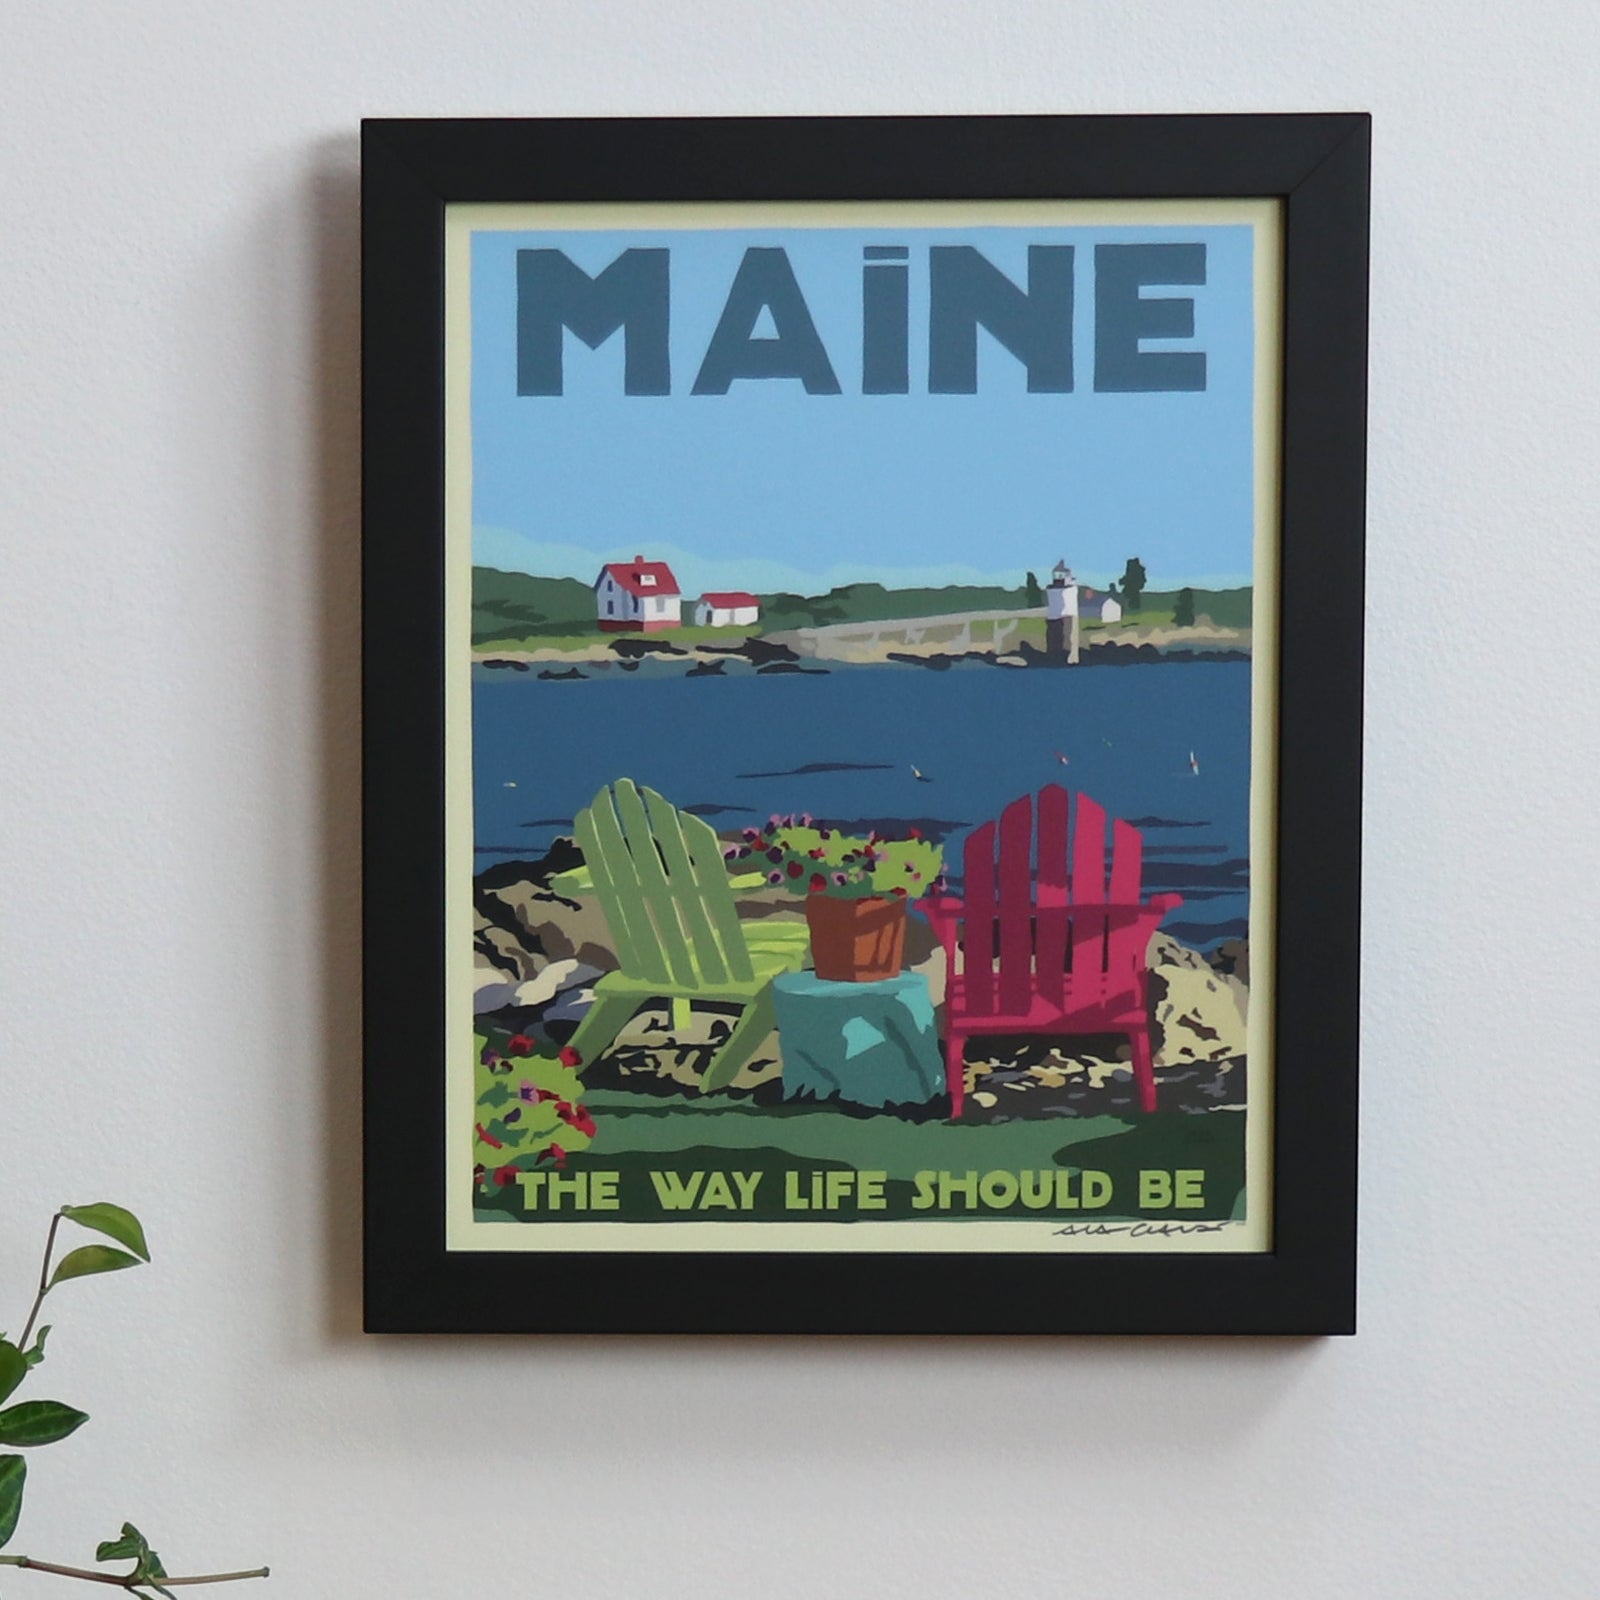 Chairs Overlooking Ram Island - Maine The Way Life Should Be Art Print 8" x 10" Framed Travel Poster